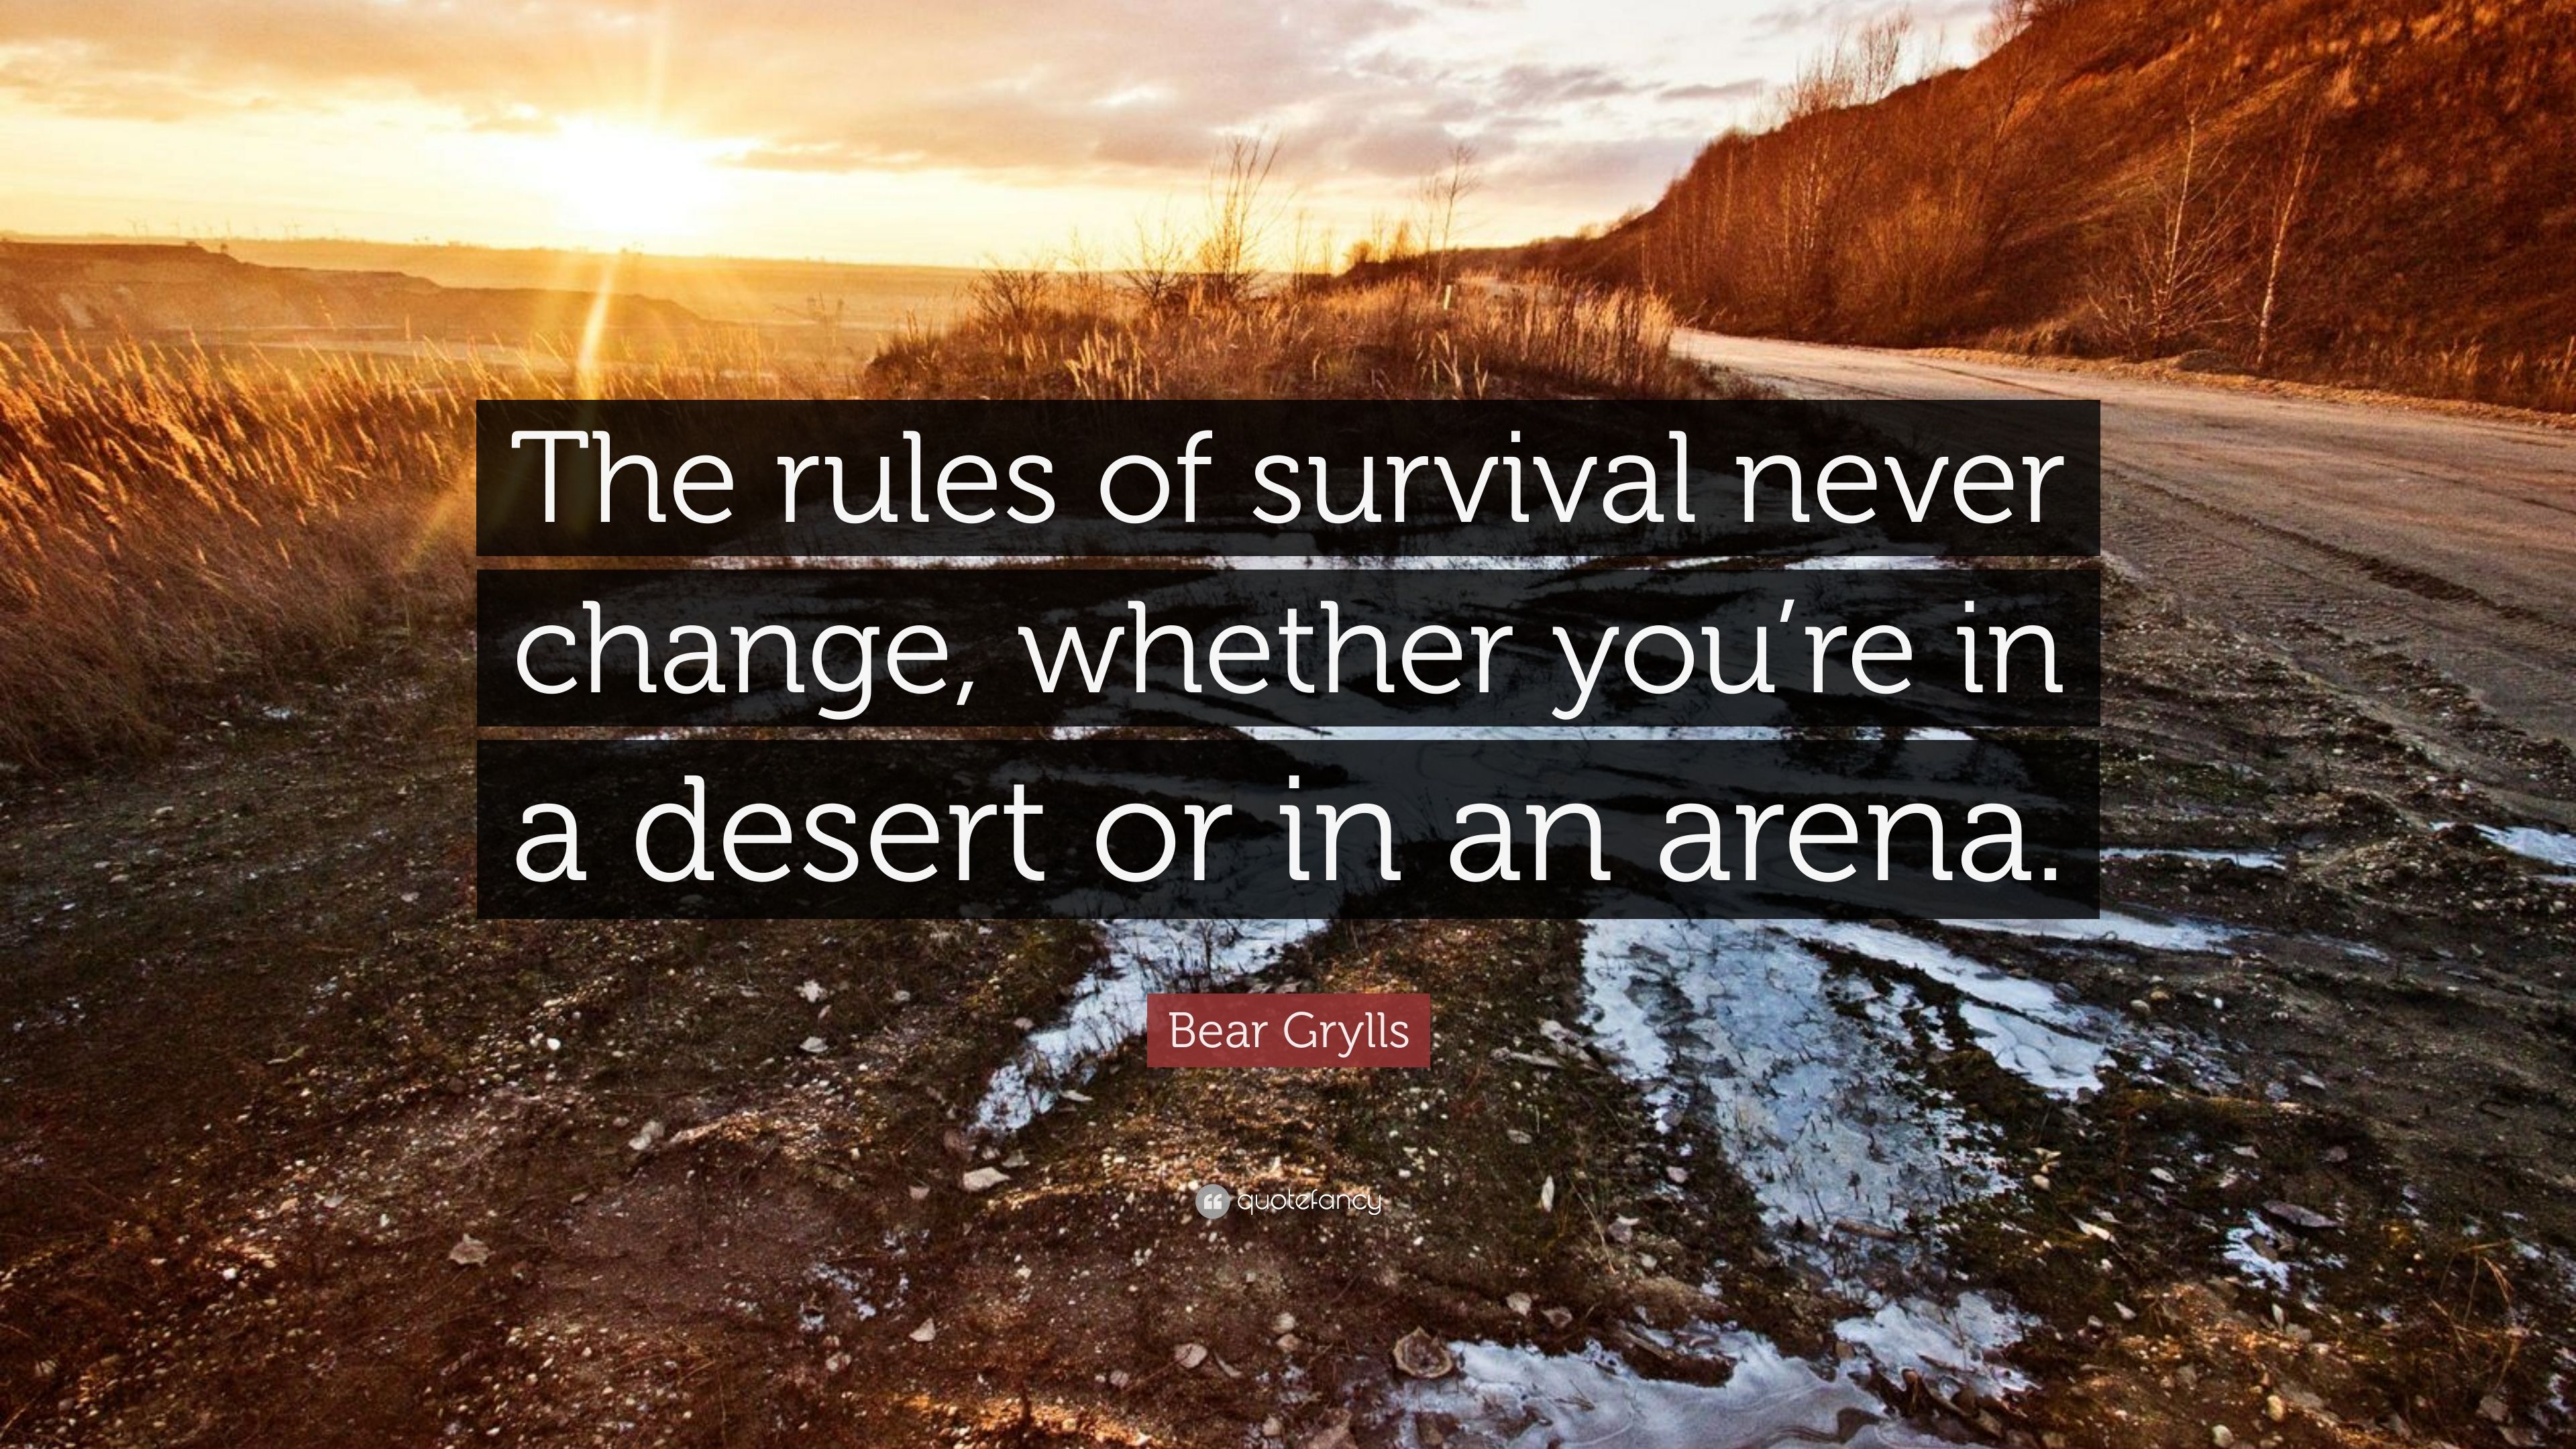 Bear Grylls Quote: “The rules of survival never change, whether